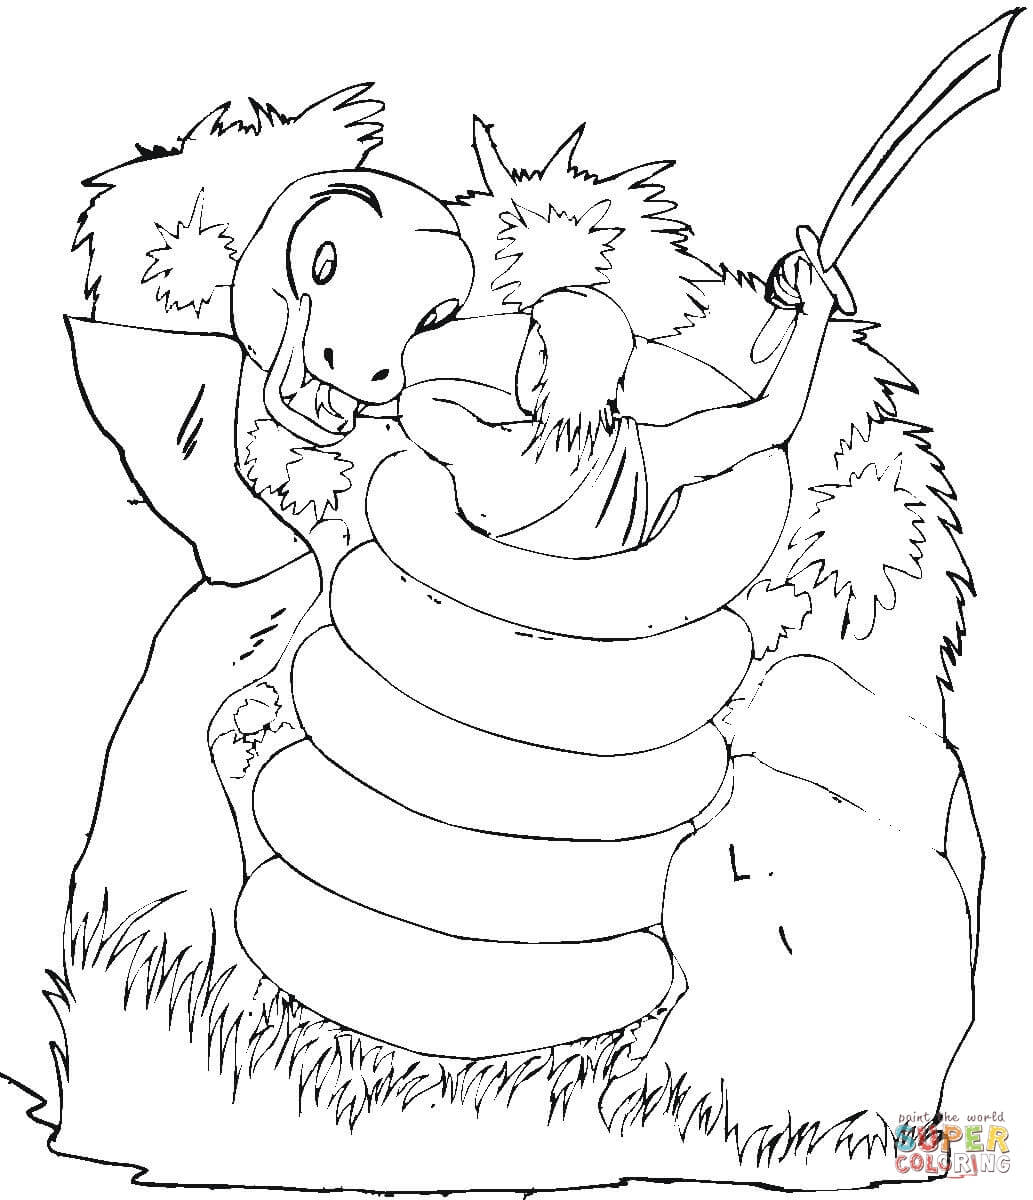 Boa Constrictor coloring pages | Free Coloring Pages